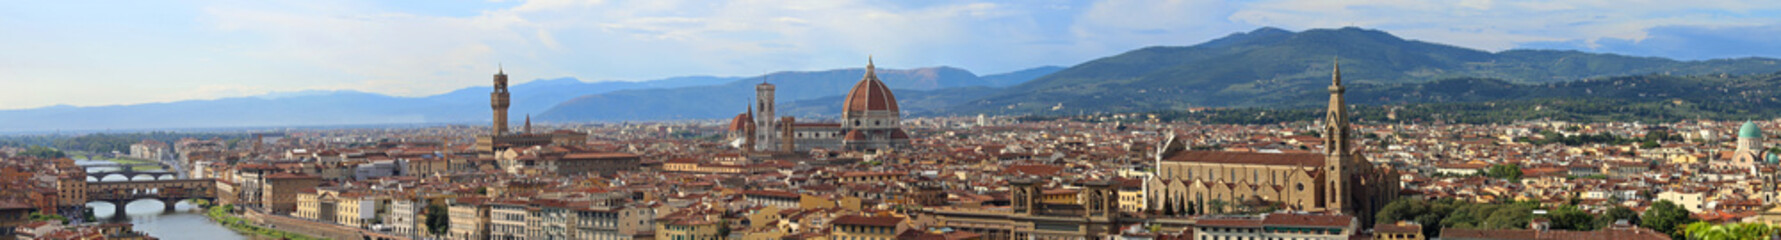 Florence Italy Incredible Stitched Panorama